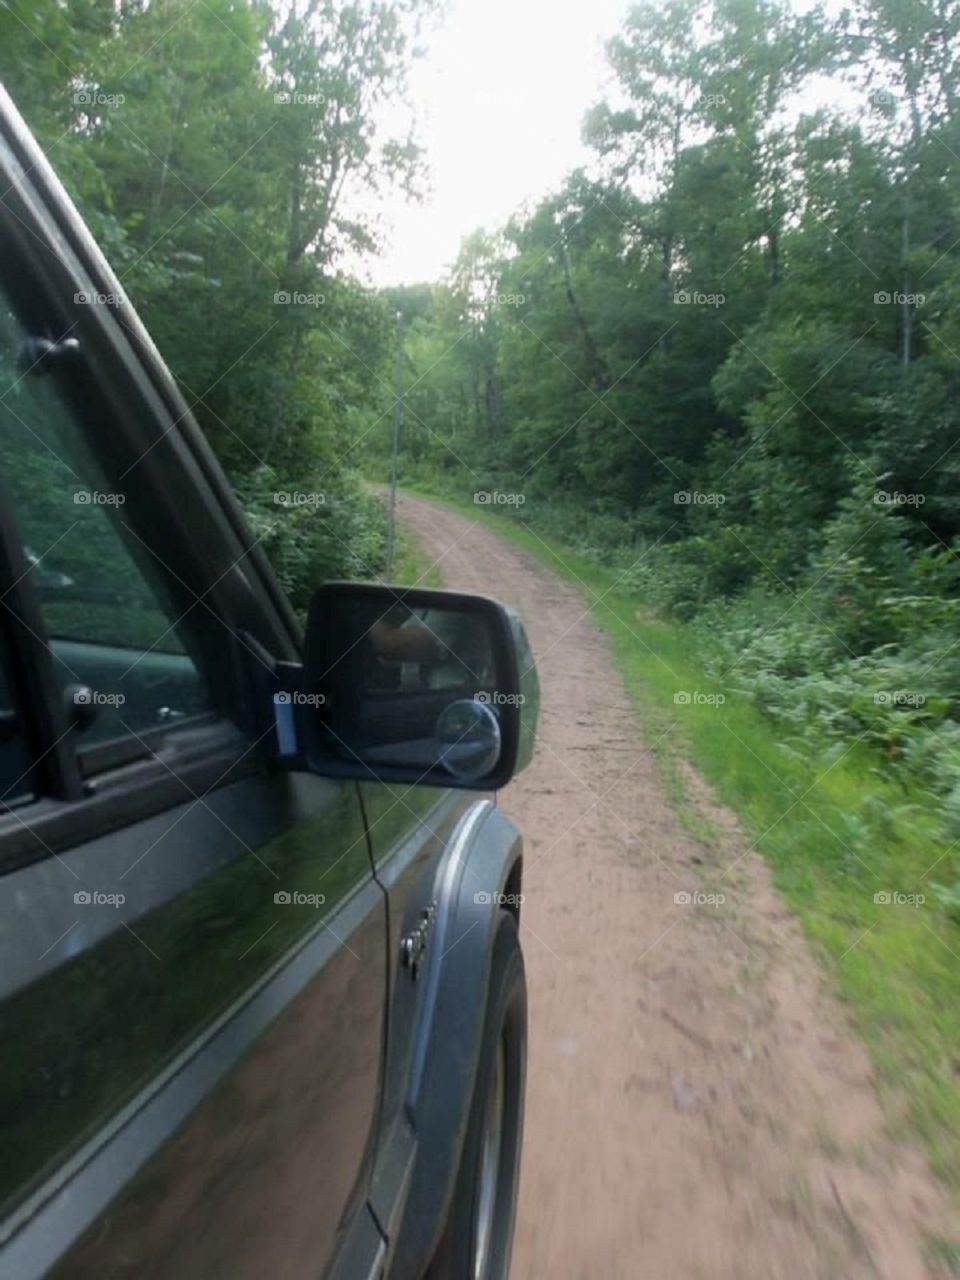 A little off roading down copper mine roads in Northern Wisconsin.